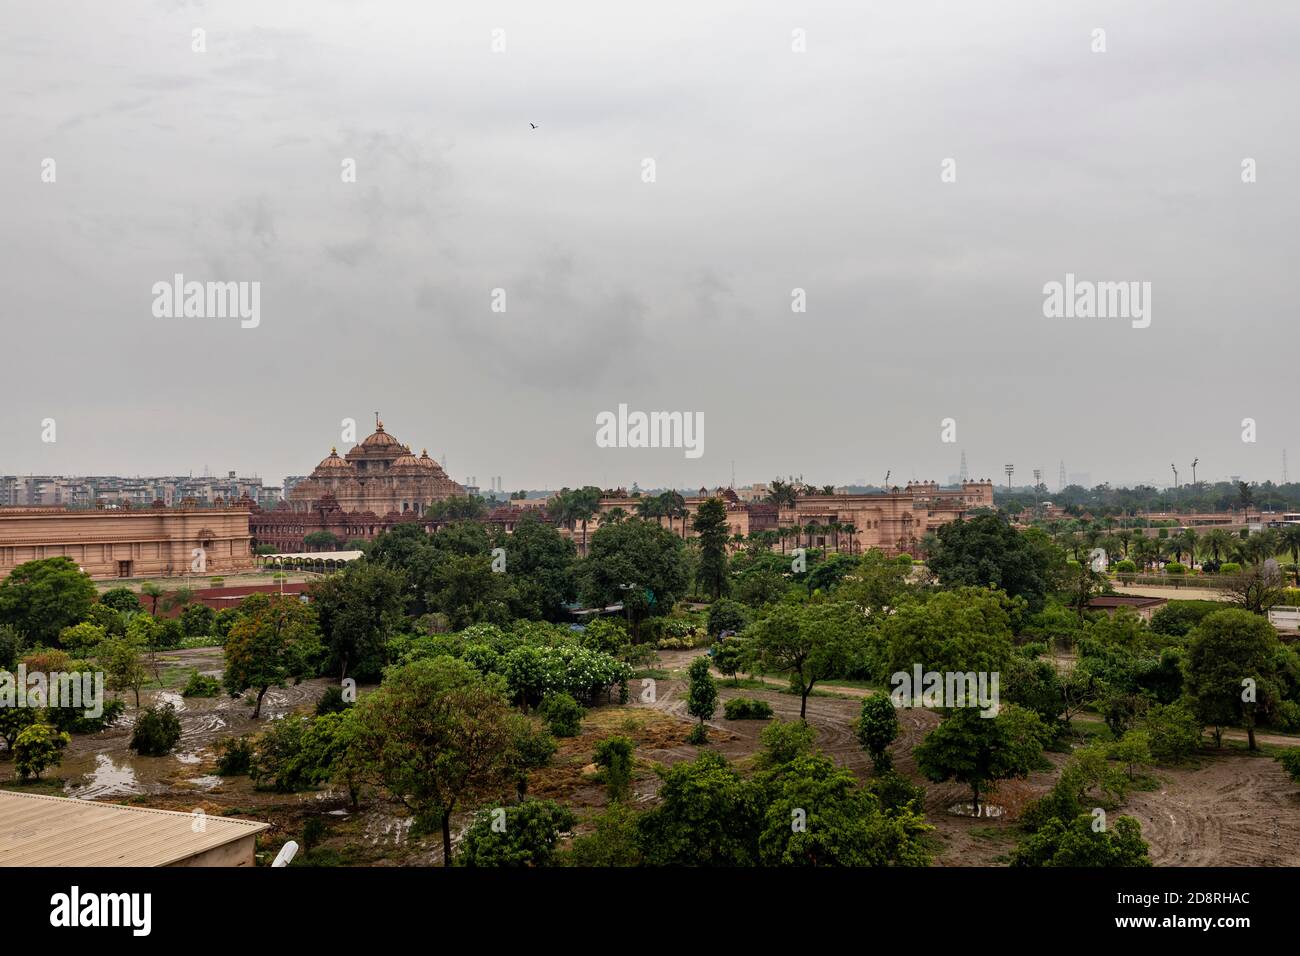 A wide angle view of the famous Akshardham temple in New Delhi. Stock Photo